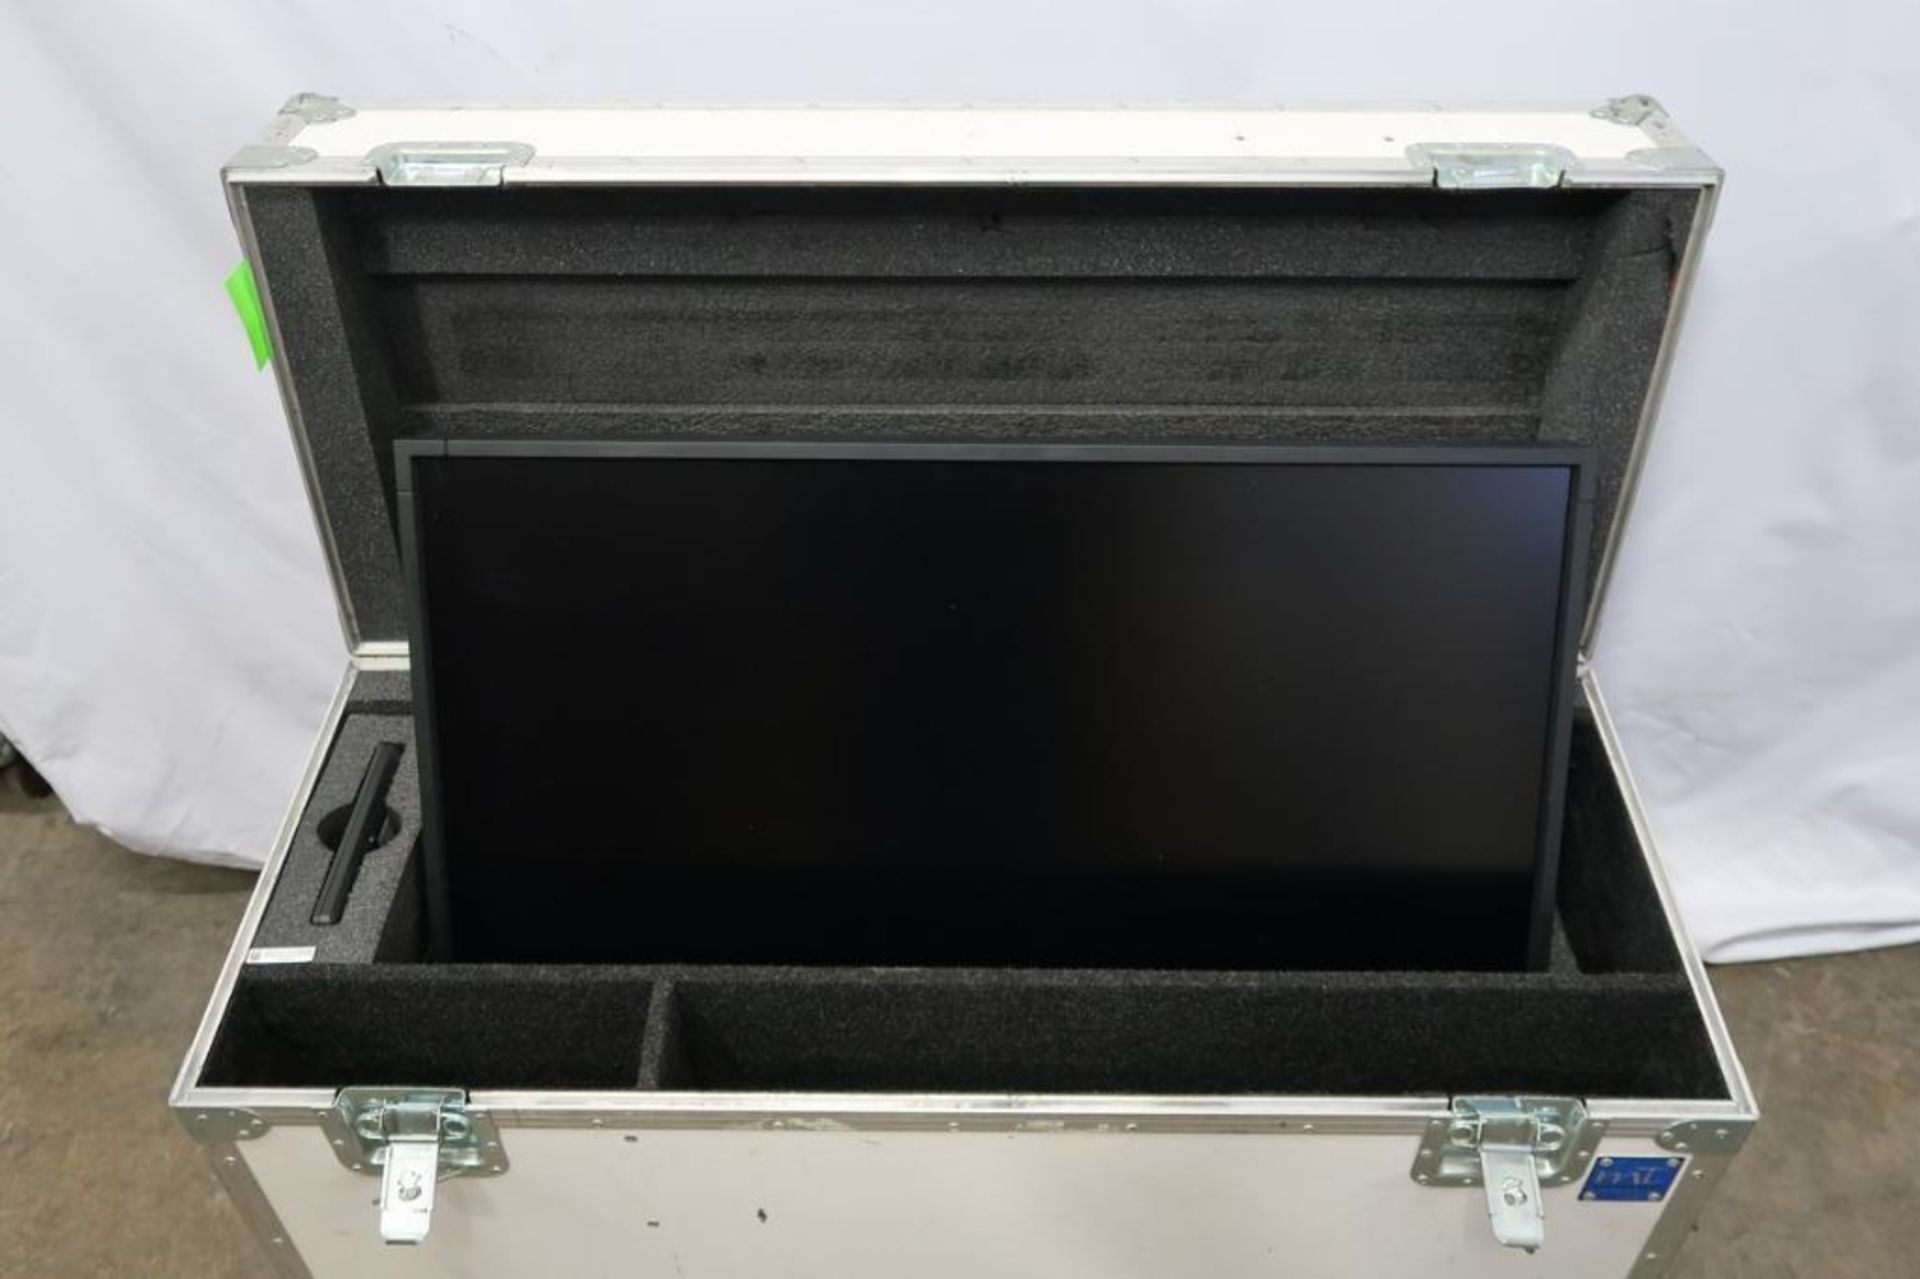 NEC MultiSync P401 40" LCD Monitor with SDI Input Card with MT Cases 40" Monitor Case - Image 2 of 3